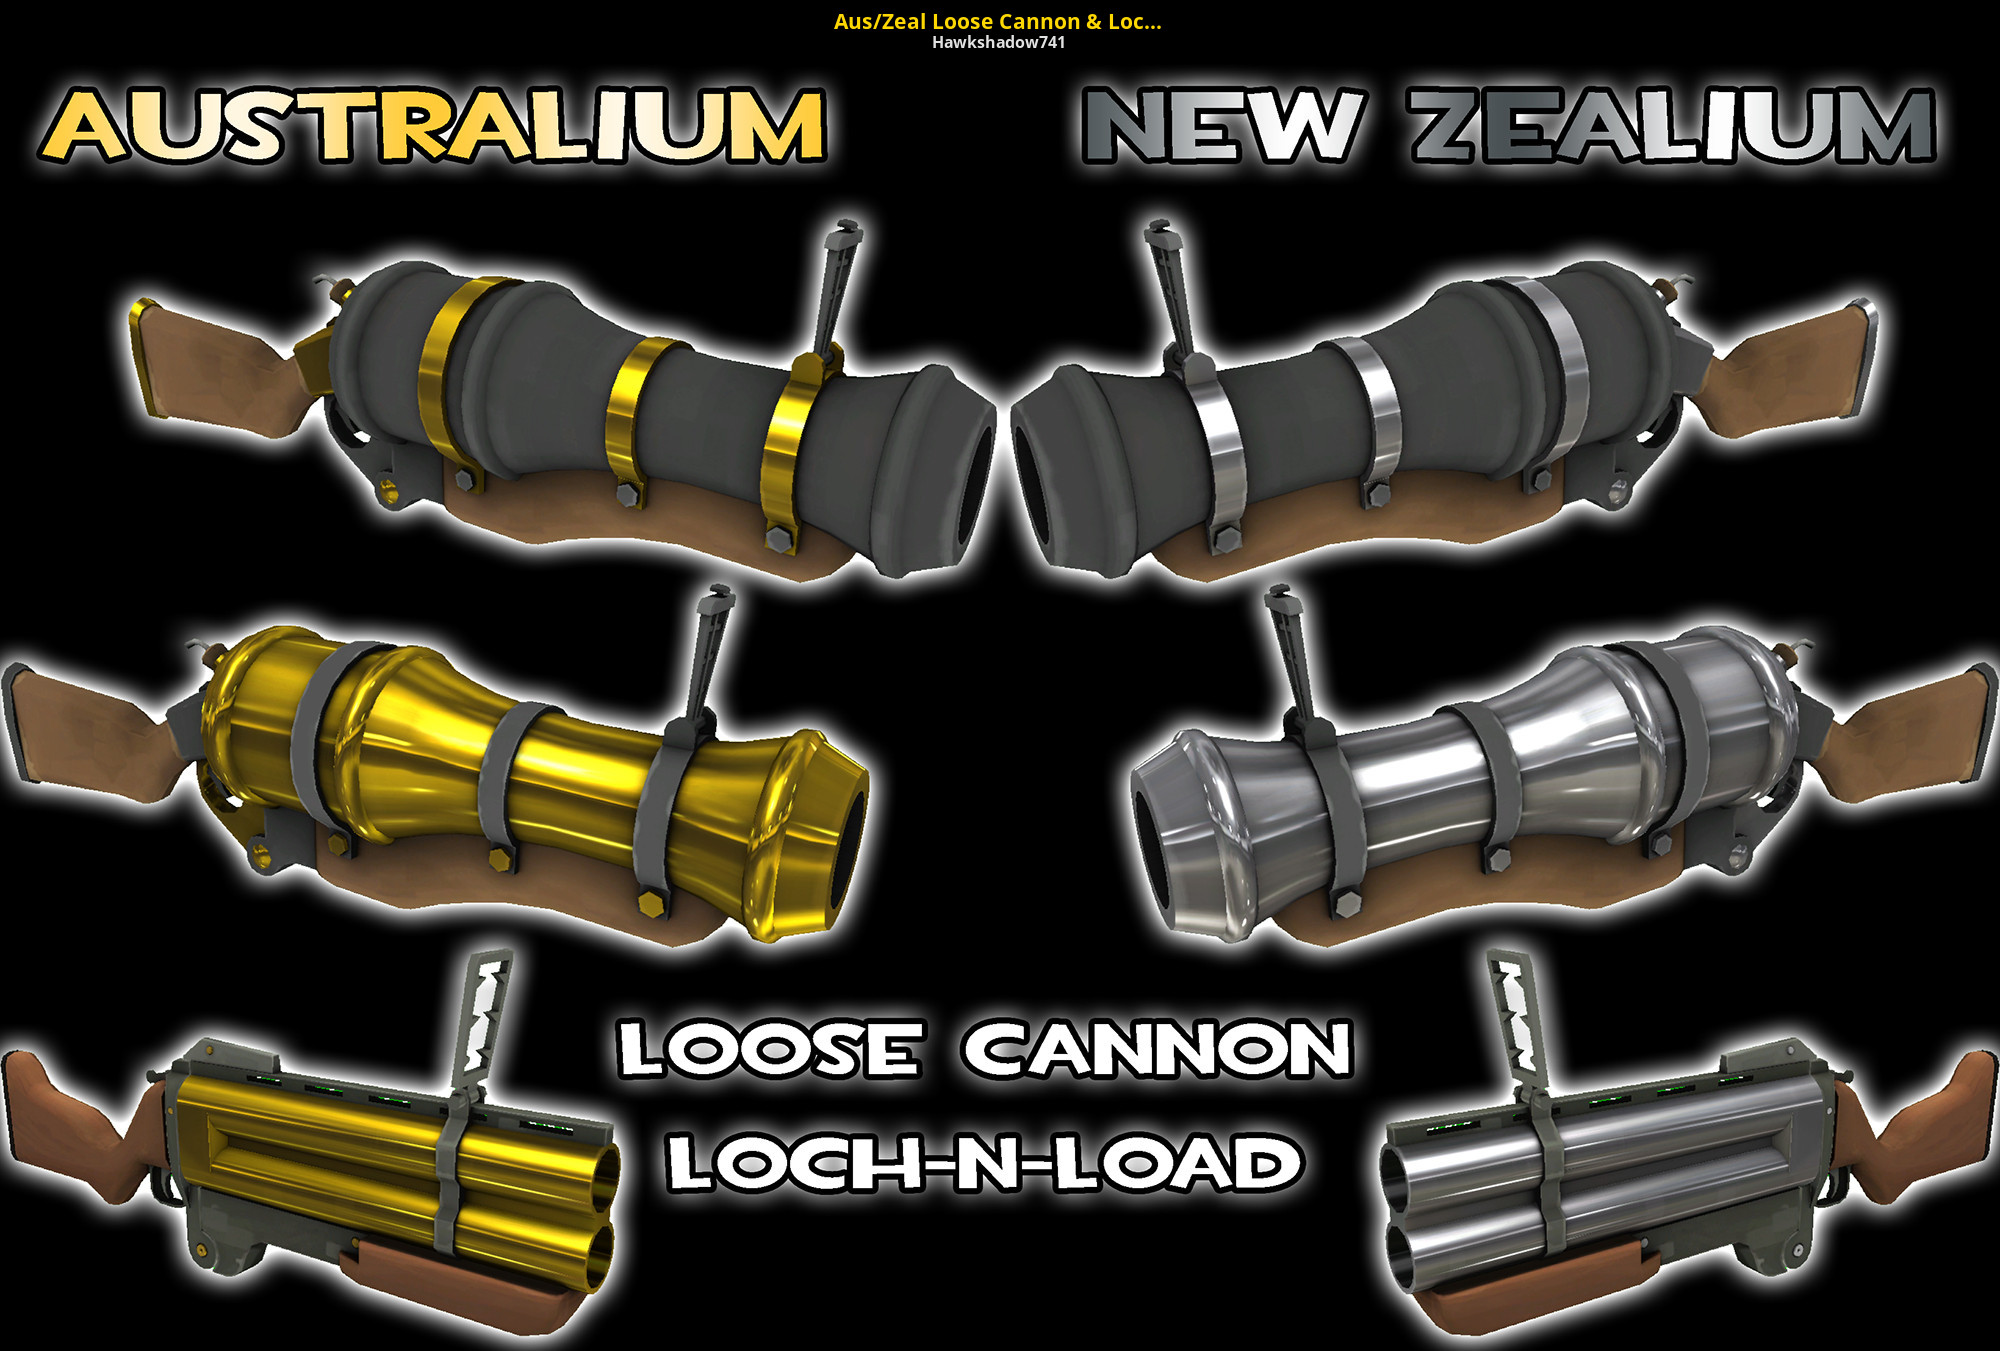 Aus/Zeal Loose Cannon & Loch-n-Load Team Fortress 2 Mods.